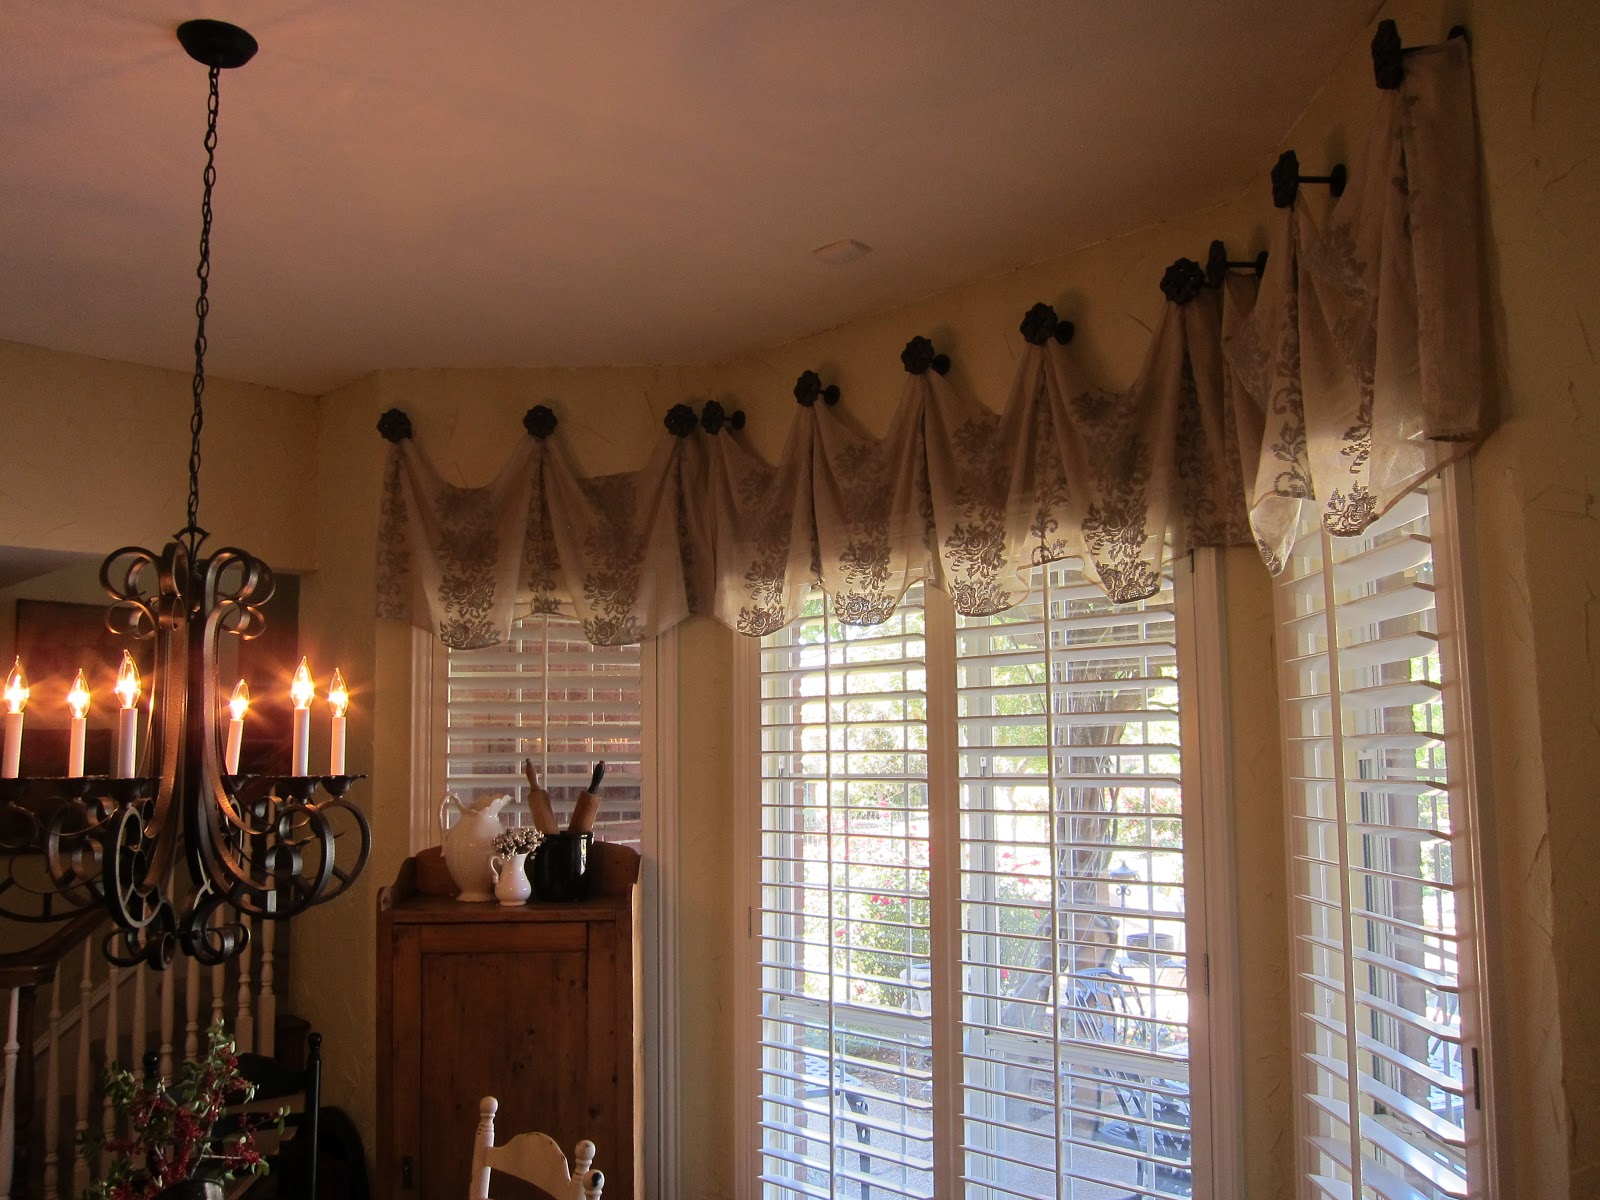 bathroom ideas country This is a great window treatment ideajust gives a touch of softness 